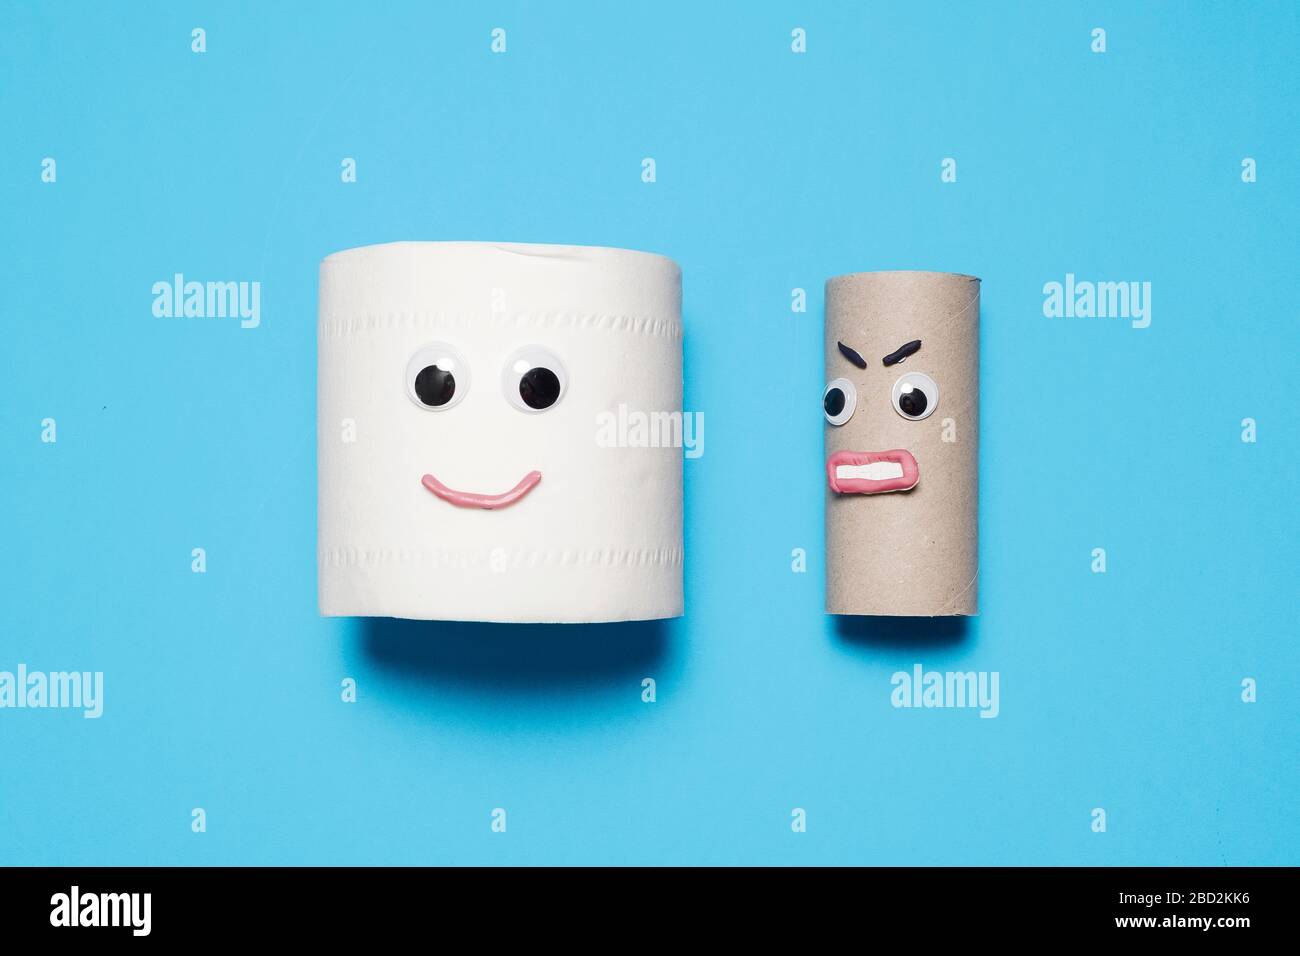 Happy smiling full roll of toilet paper next to angry empty roll with googly eyes and mouth on a blue background with copy space and room for text Stock Photo